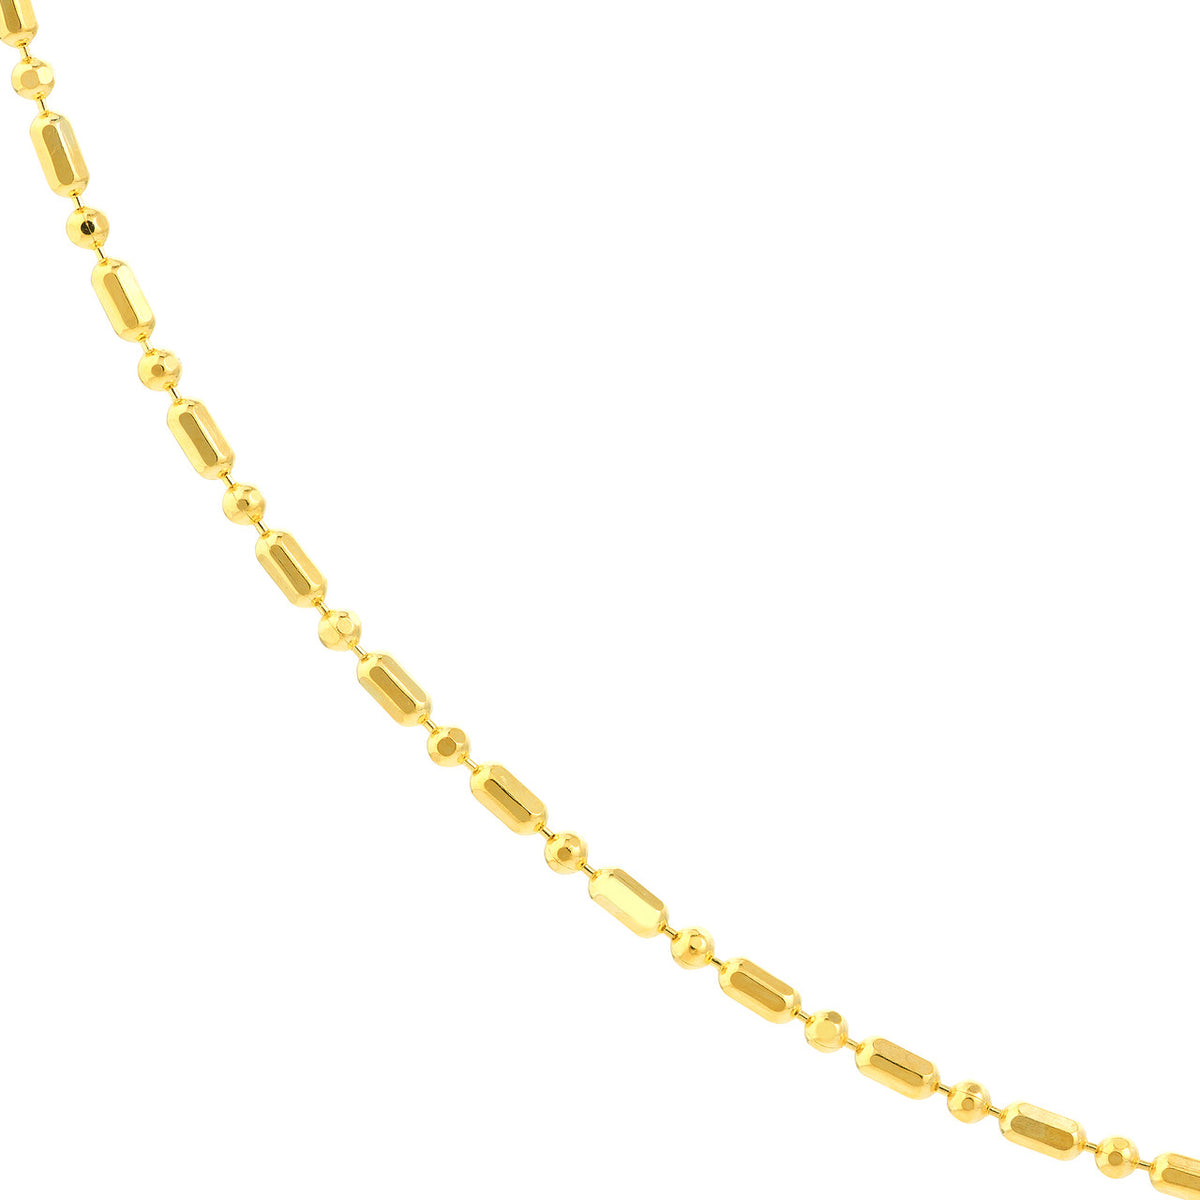 14K Yellow Gold or White Gold 1.2mm D/C Bead and Barrel Chain Necklace with Lobster Lock